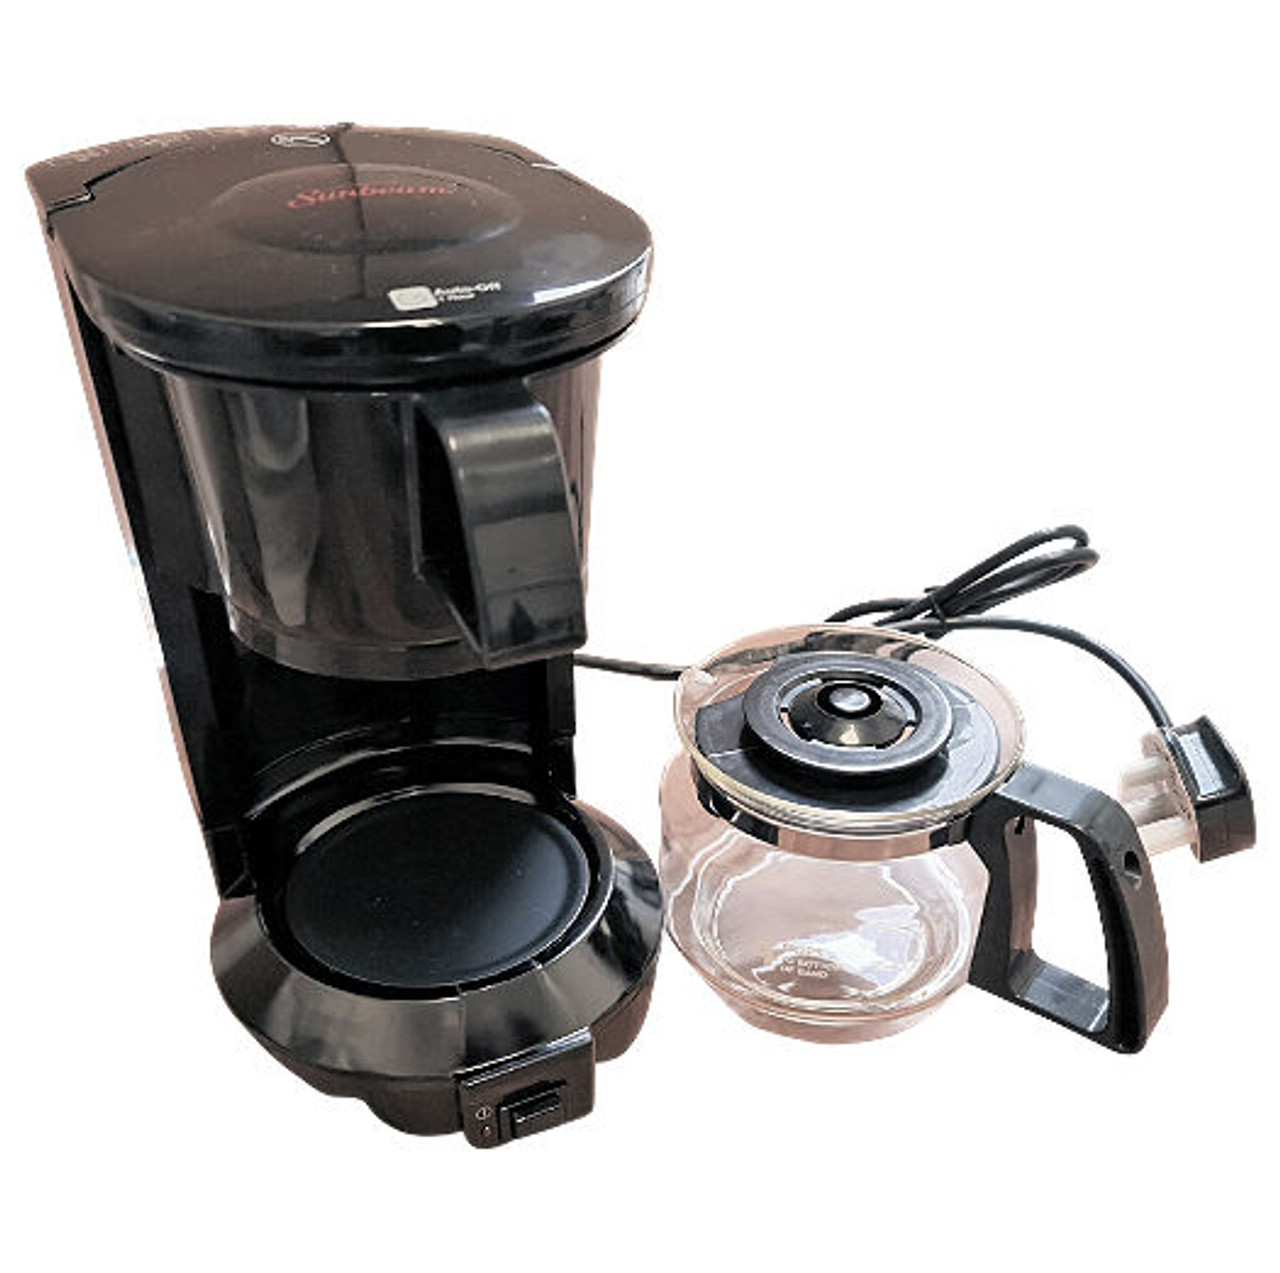 Sunbeam 3278-600 4 Cup Commercial Coffee Maker, Black